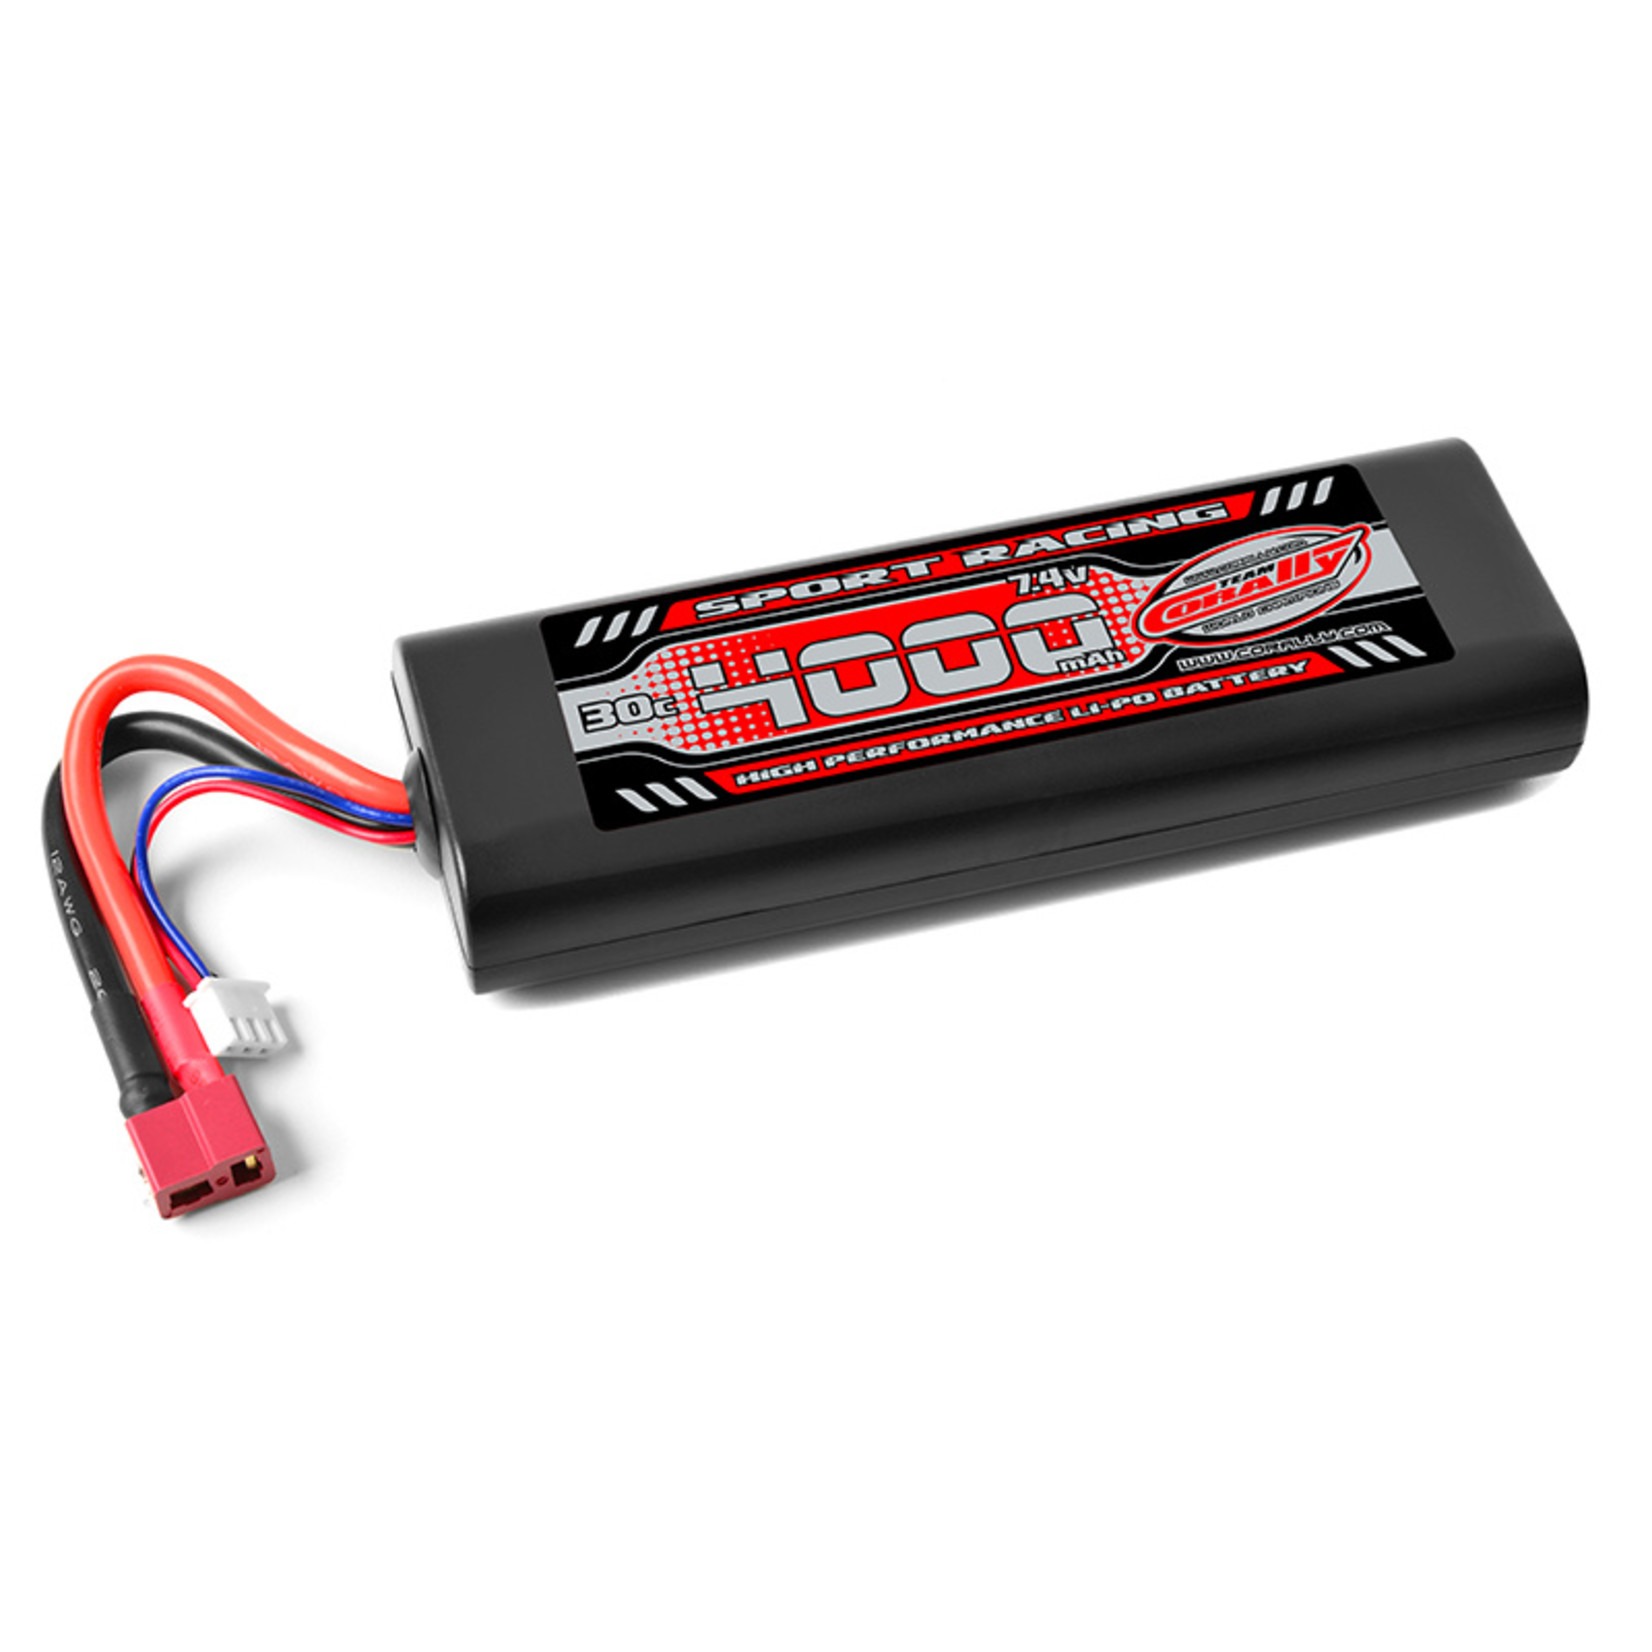 Corally (Team Corally) 4000mAh 7.4v 2S 30C Hardcase LiPo Battery with Hardwired